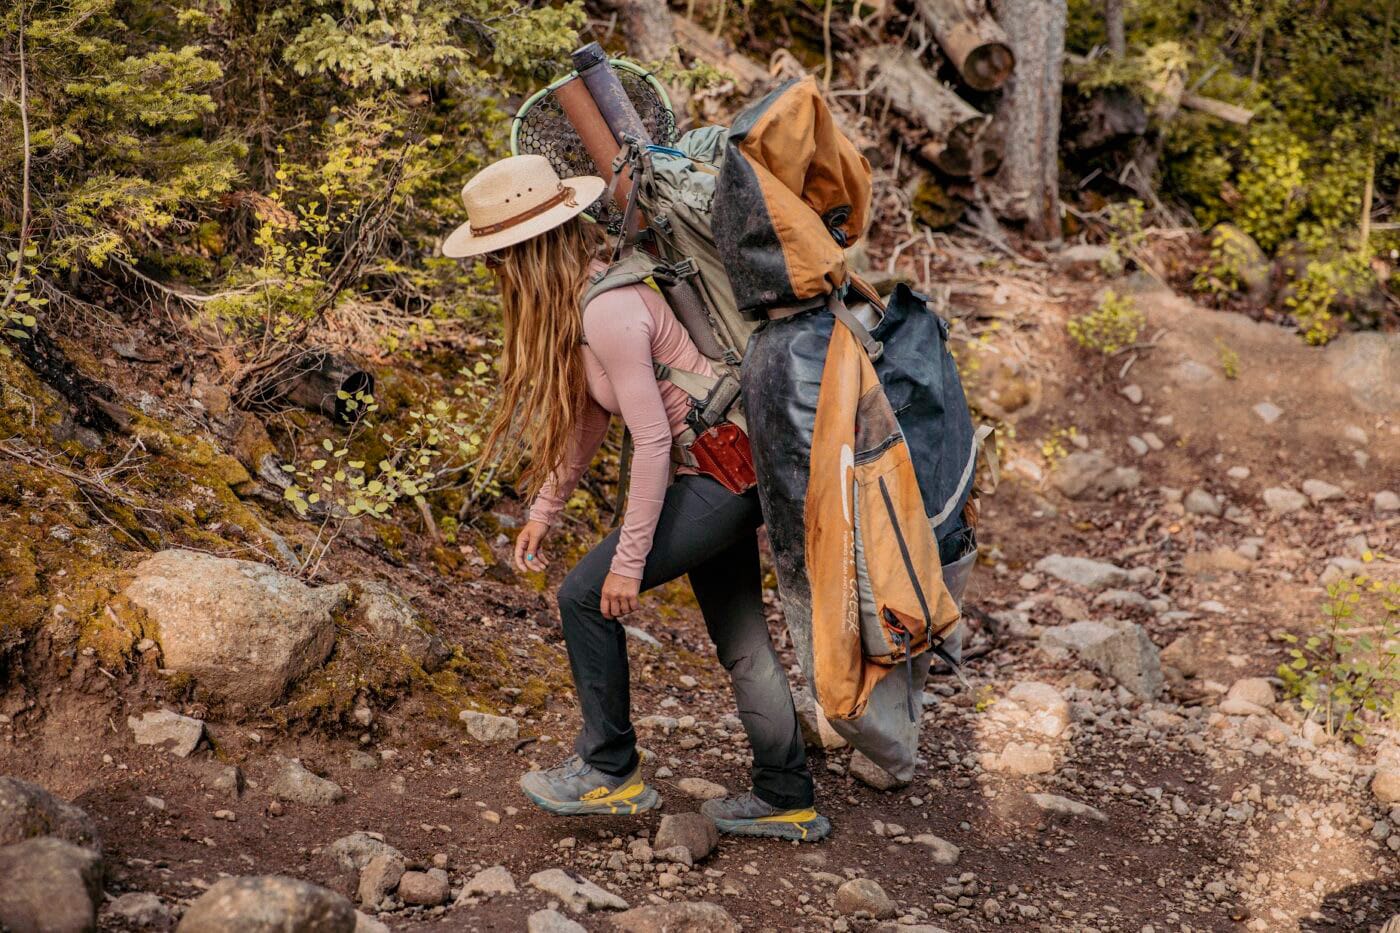 Woman backpacking while carrying 1911 pistol in holster